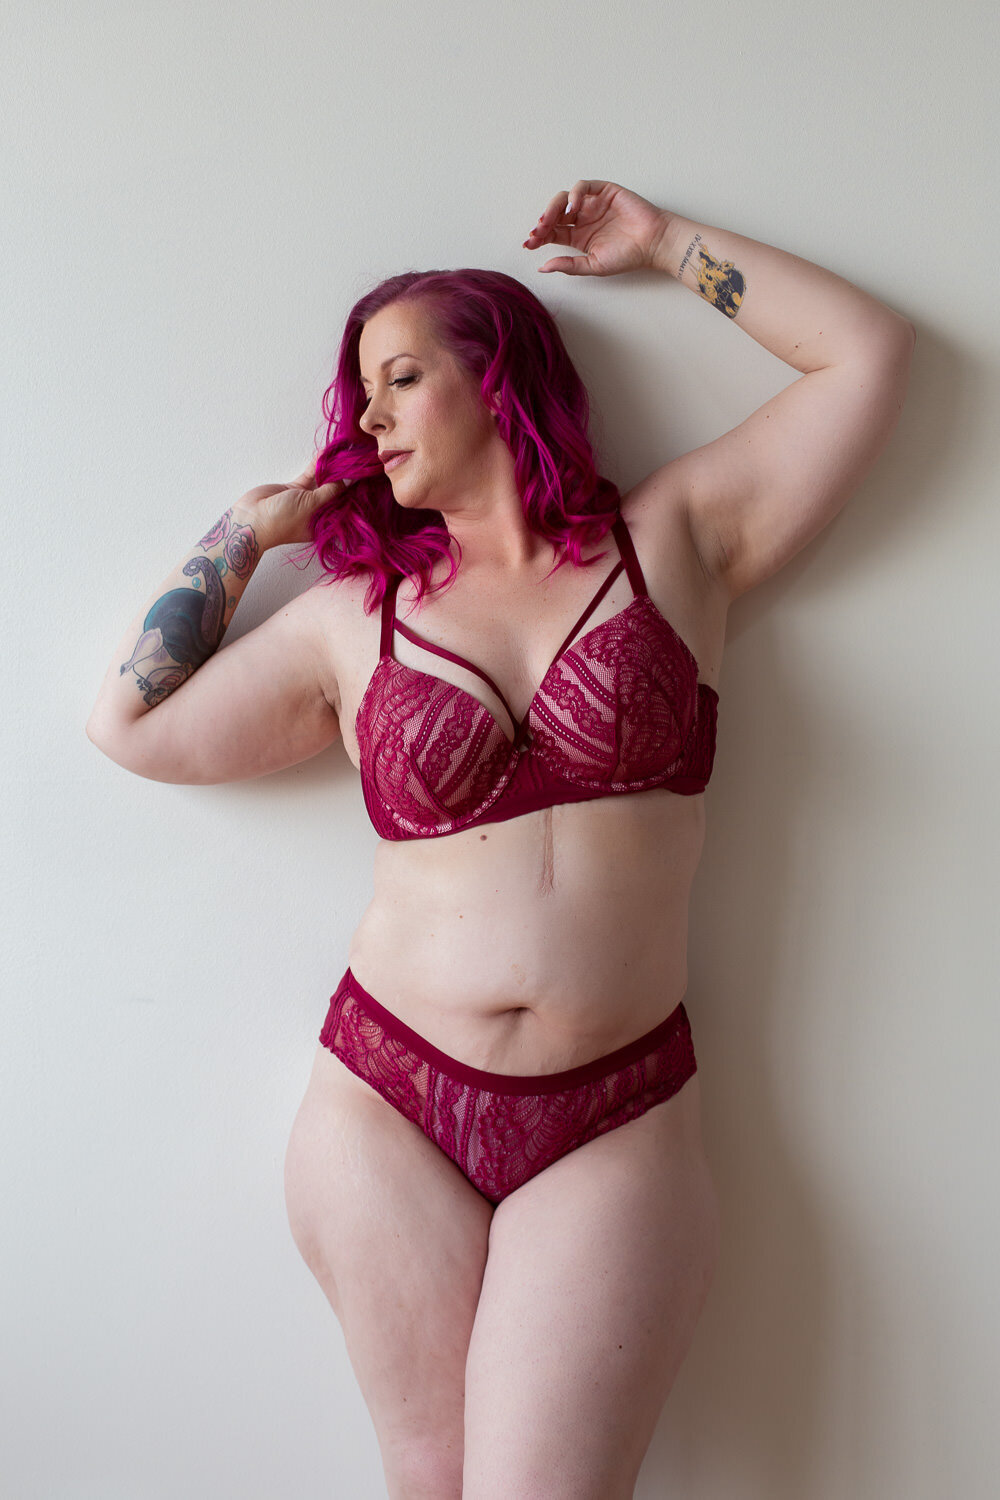 plus size woman with pink hair and matching pink bra and panty set leaning against a white wall